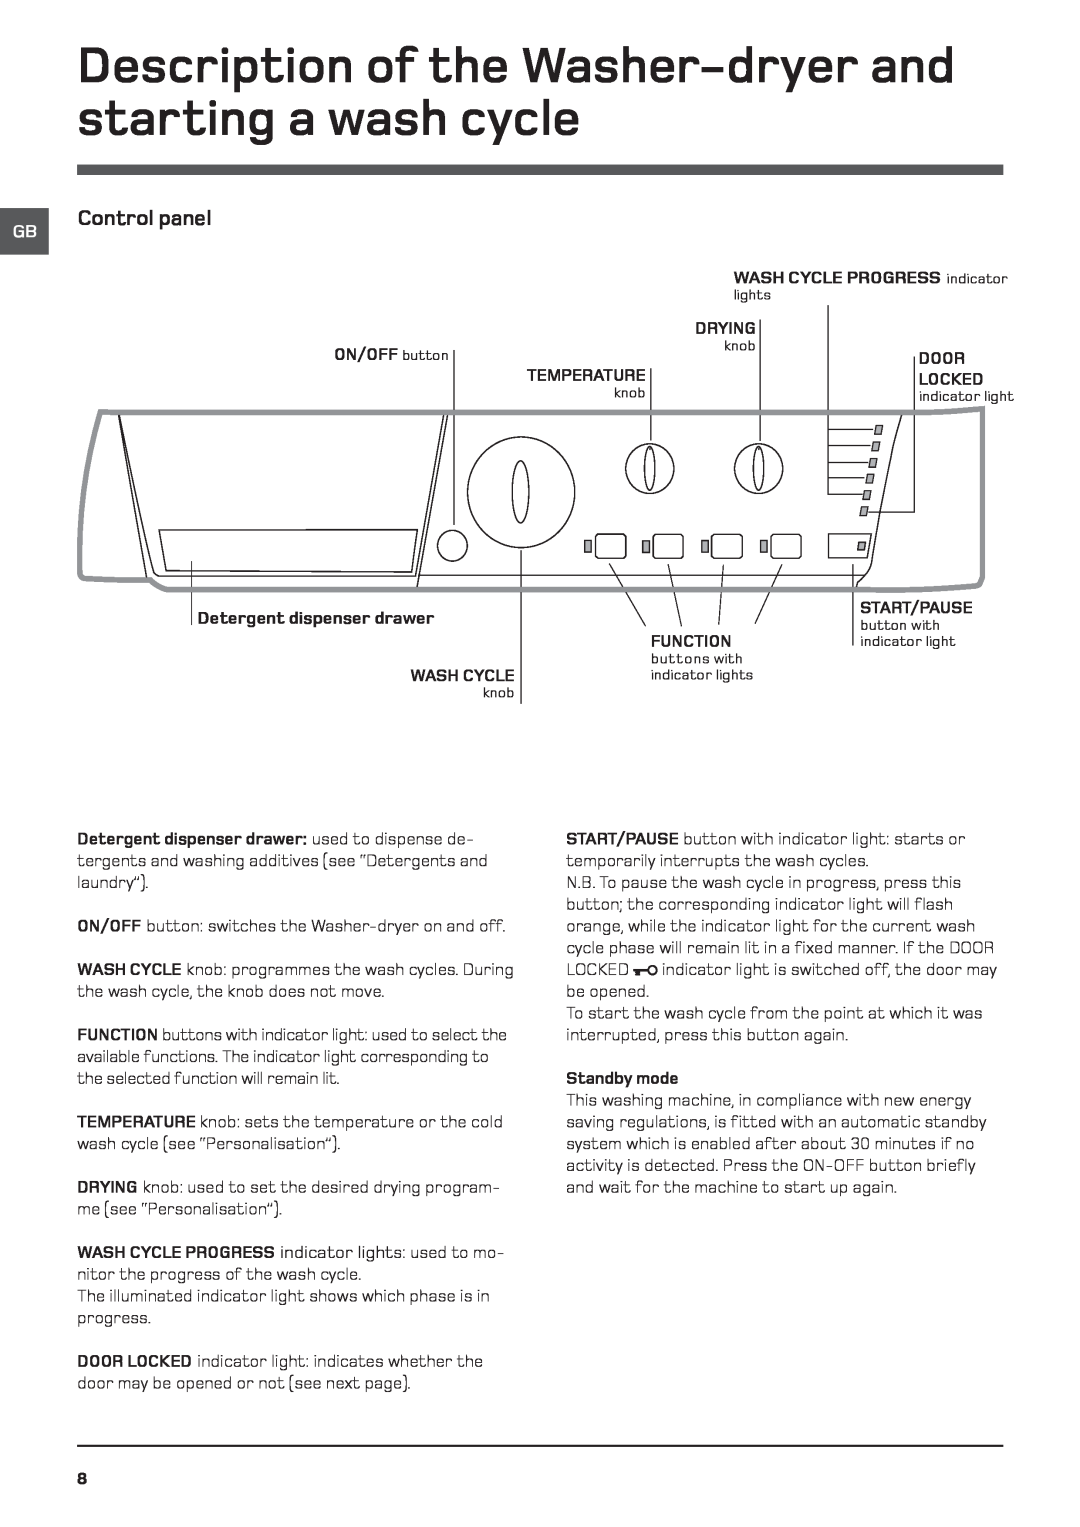 Hotpoint BHWD 129 Description of the Washer-dryer and starting a wash cycle, Control panel, WASH CYCLE PROGRESS indicator 